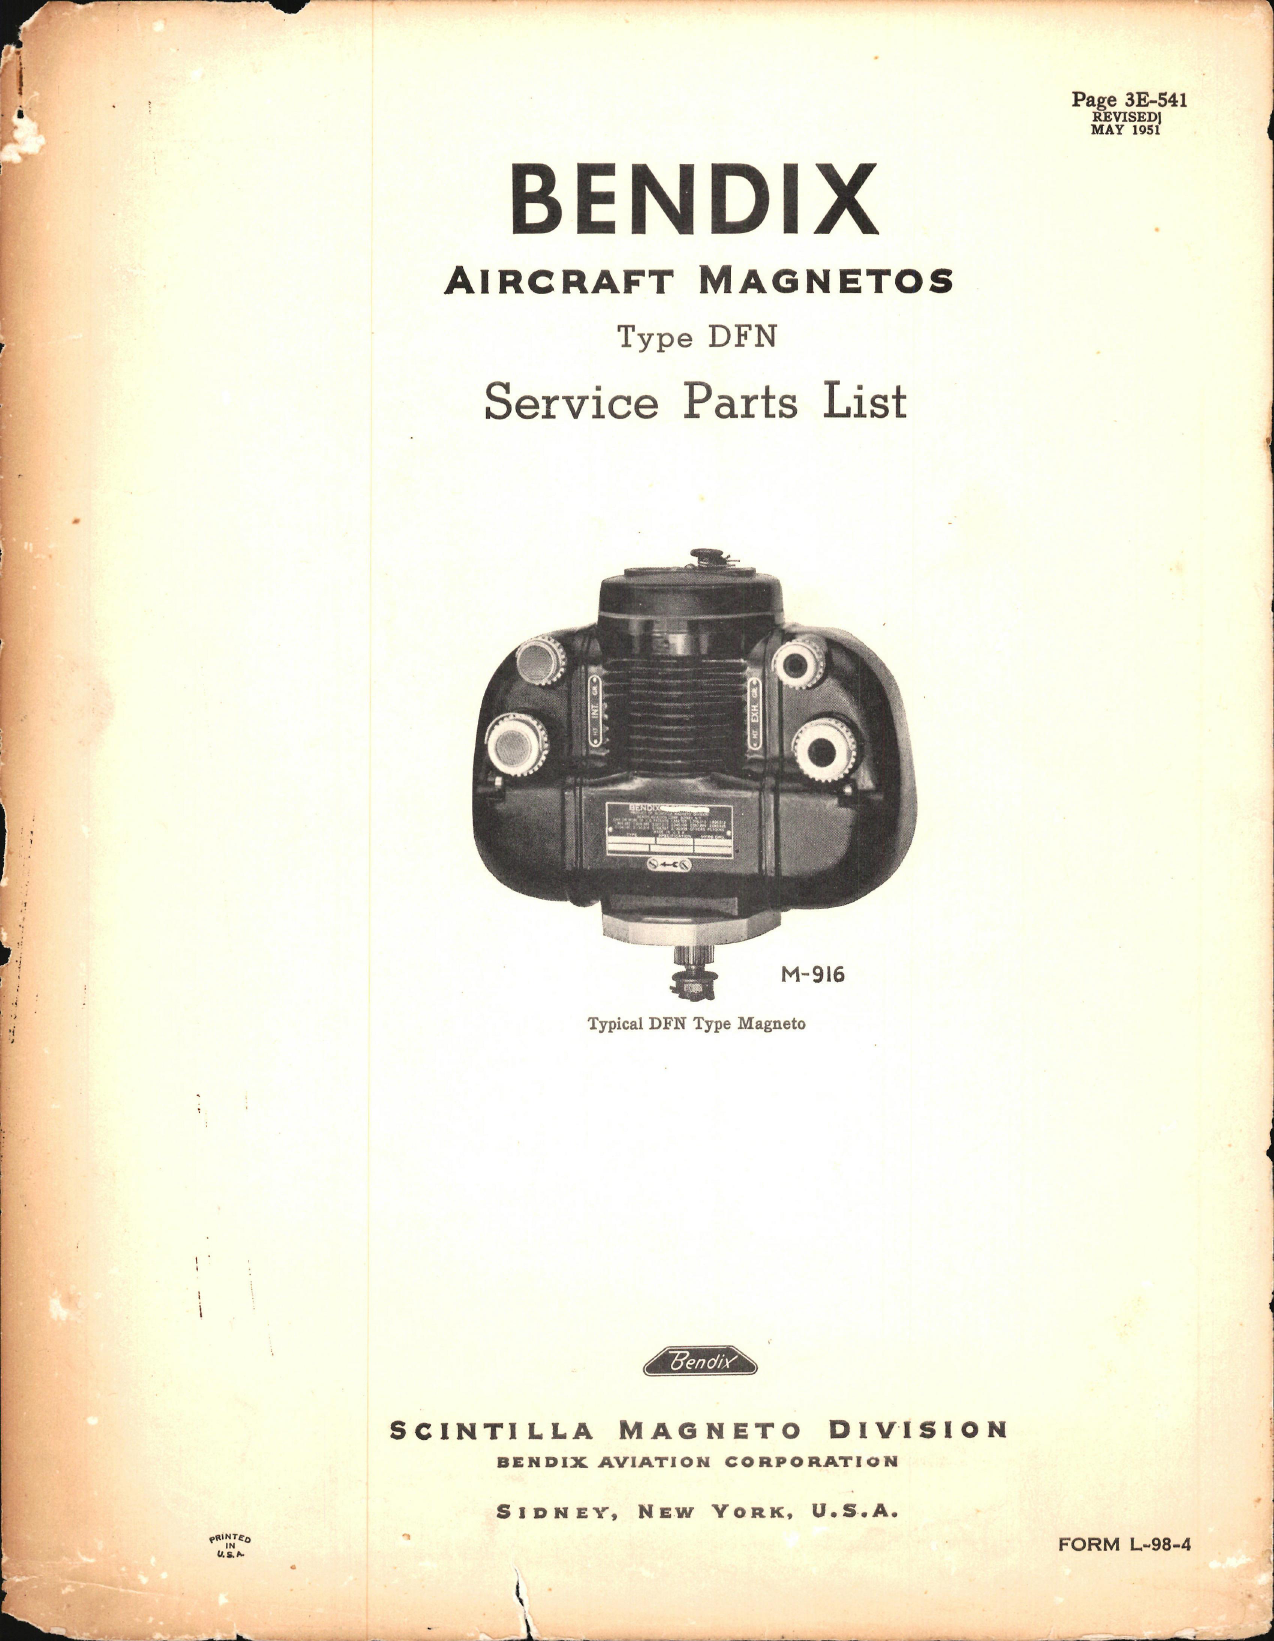 Sample page 1 from AirCorps Library document: Service Parts List for Bendix Magnetos Types DFN, Part No. M-916